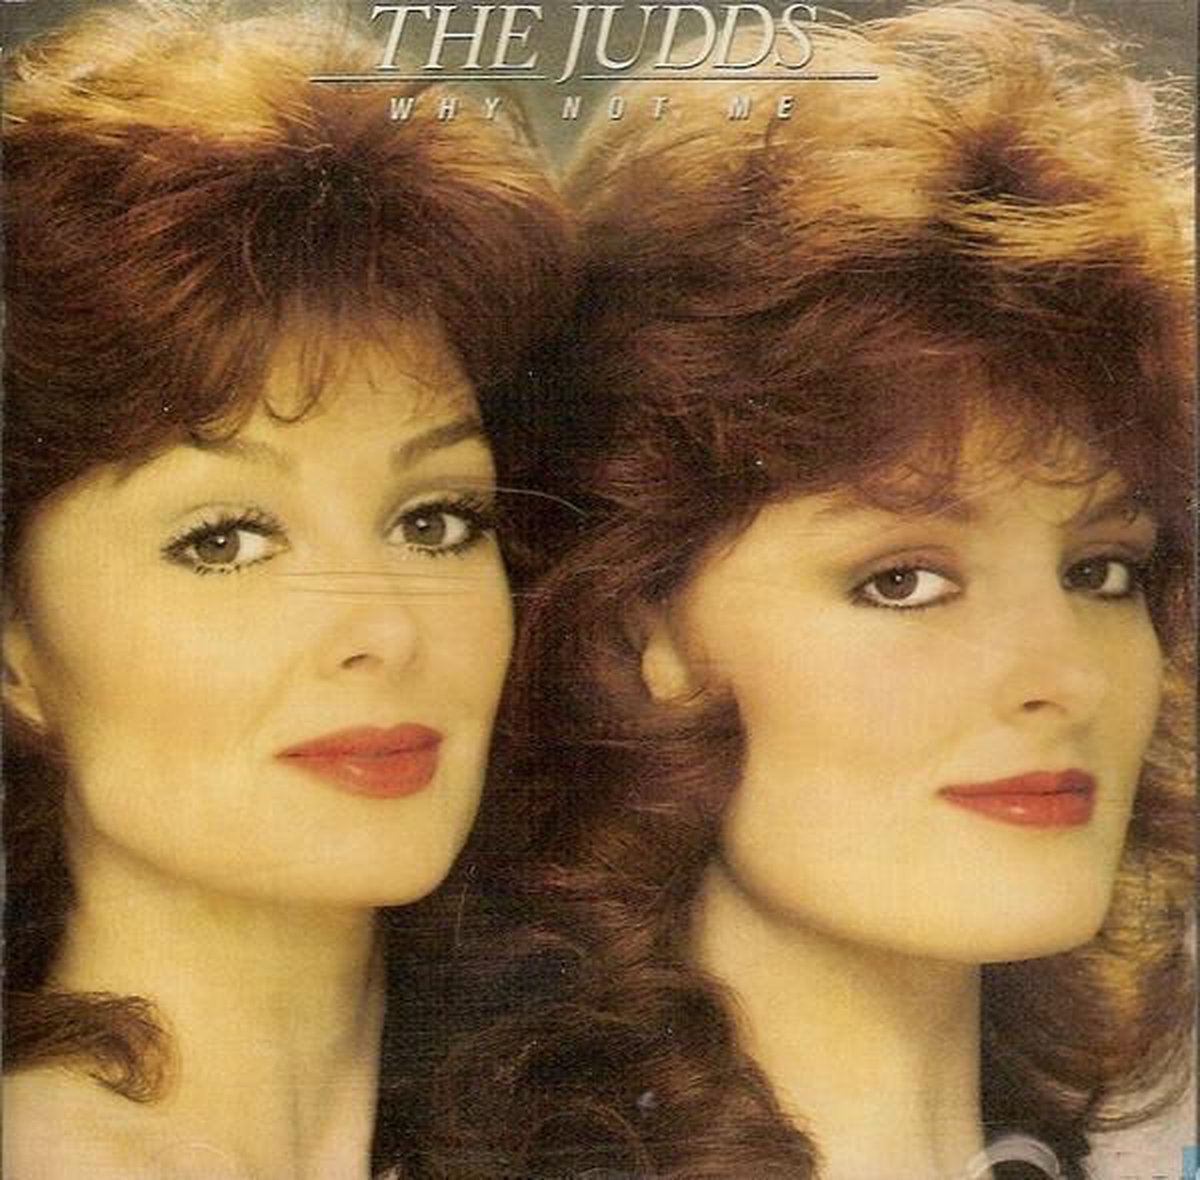 The Judds - Why not me - The Judds